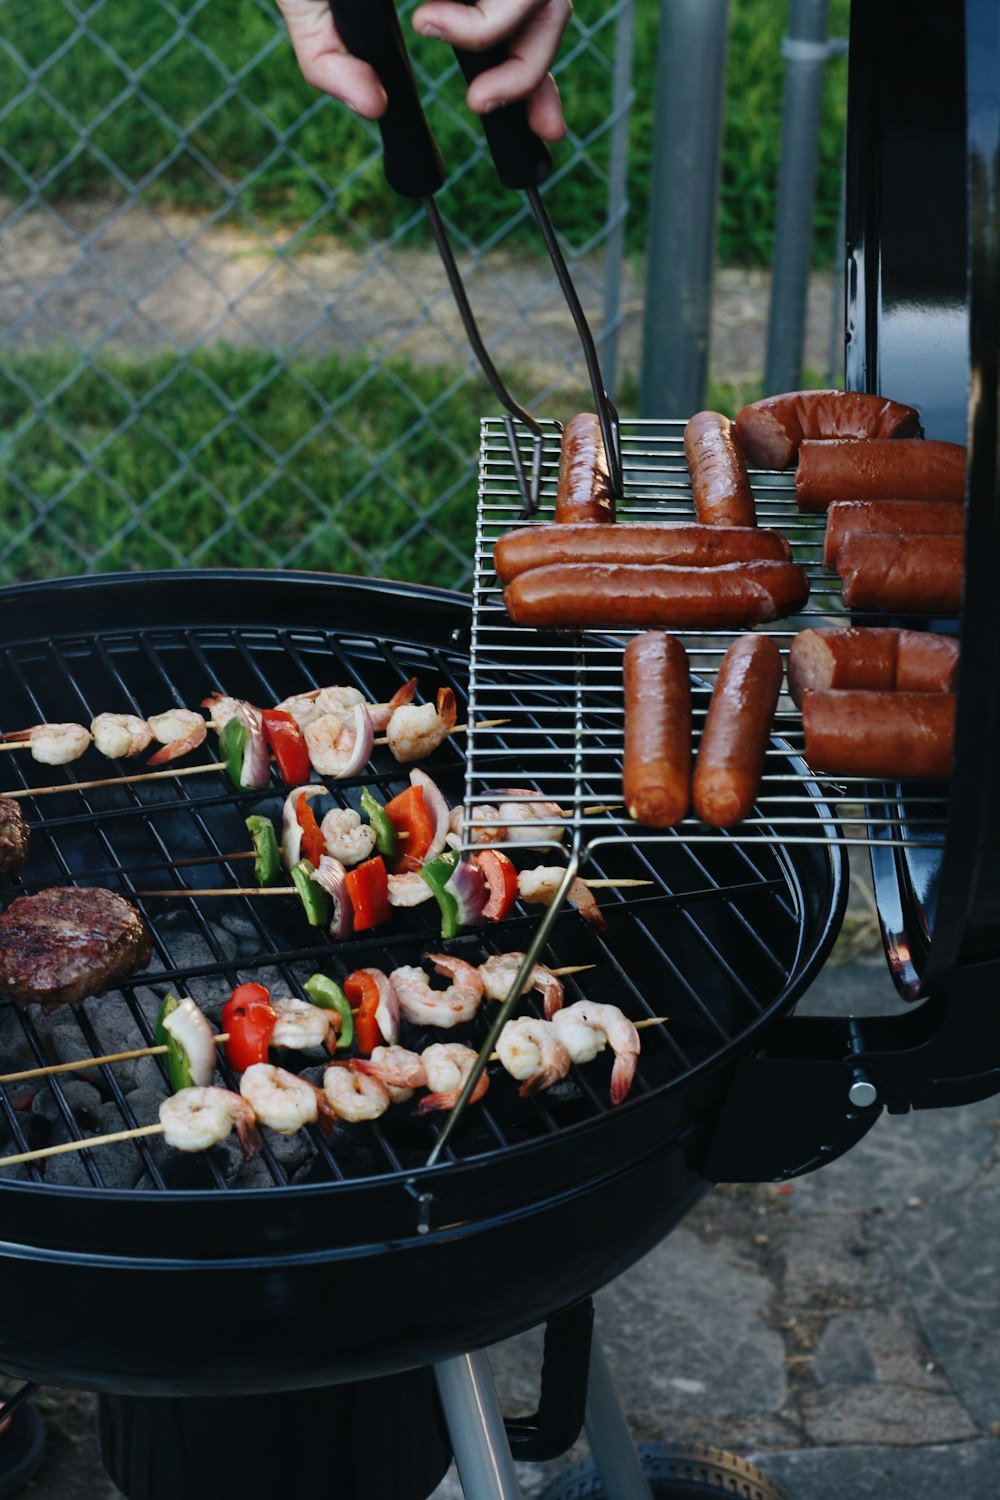 grilled sausage and meat beside gray chain-link fence